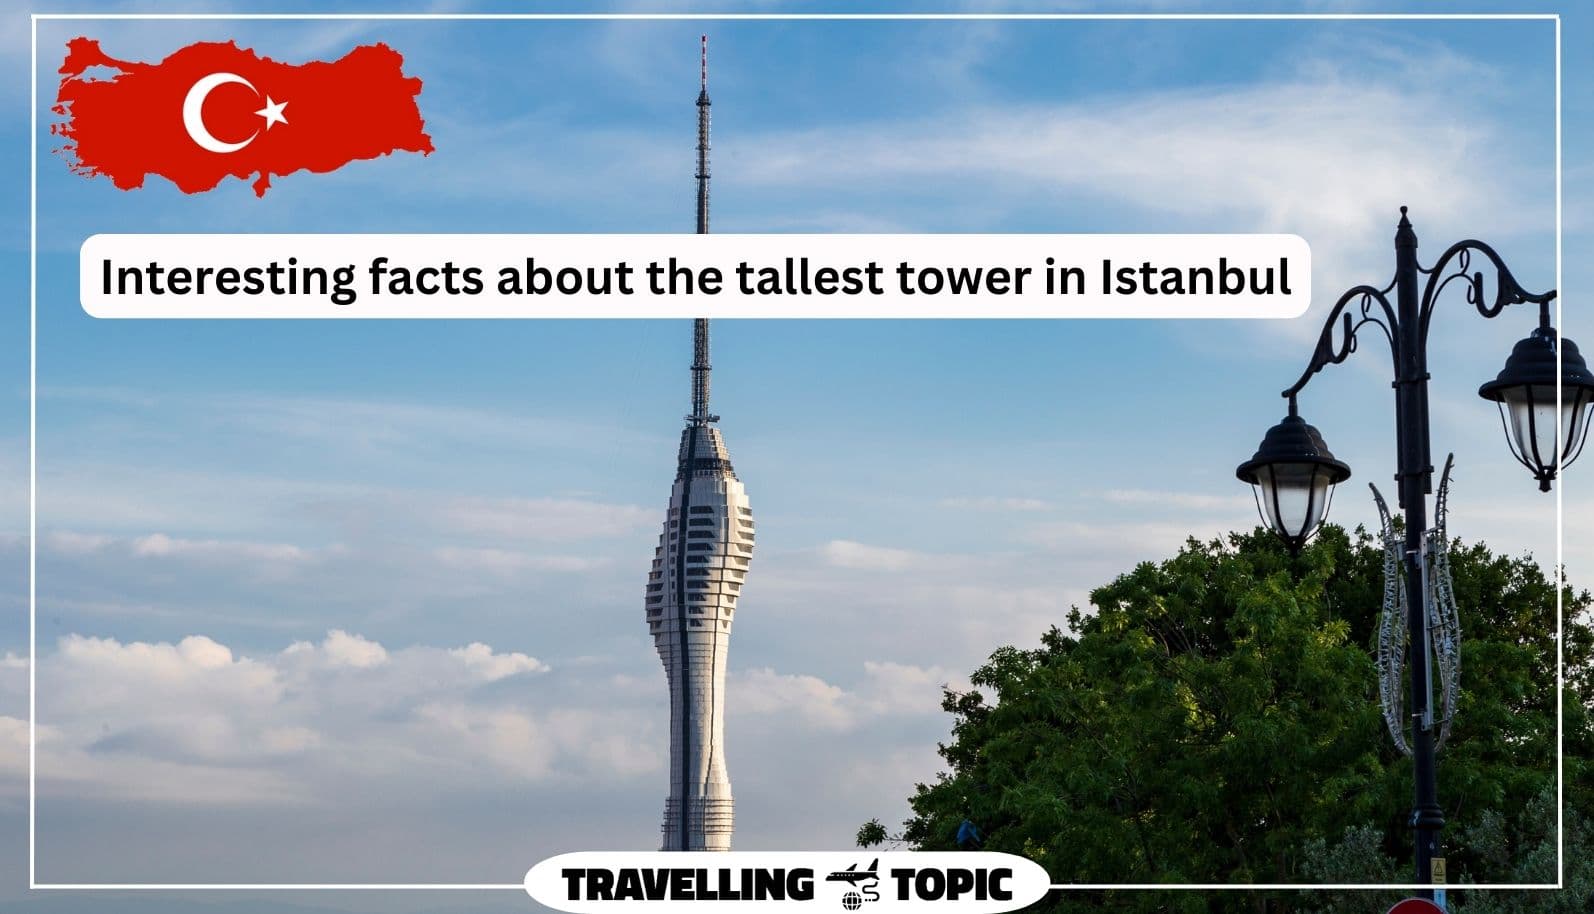 Interesting facts about the tallest tower in Istanbul